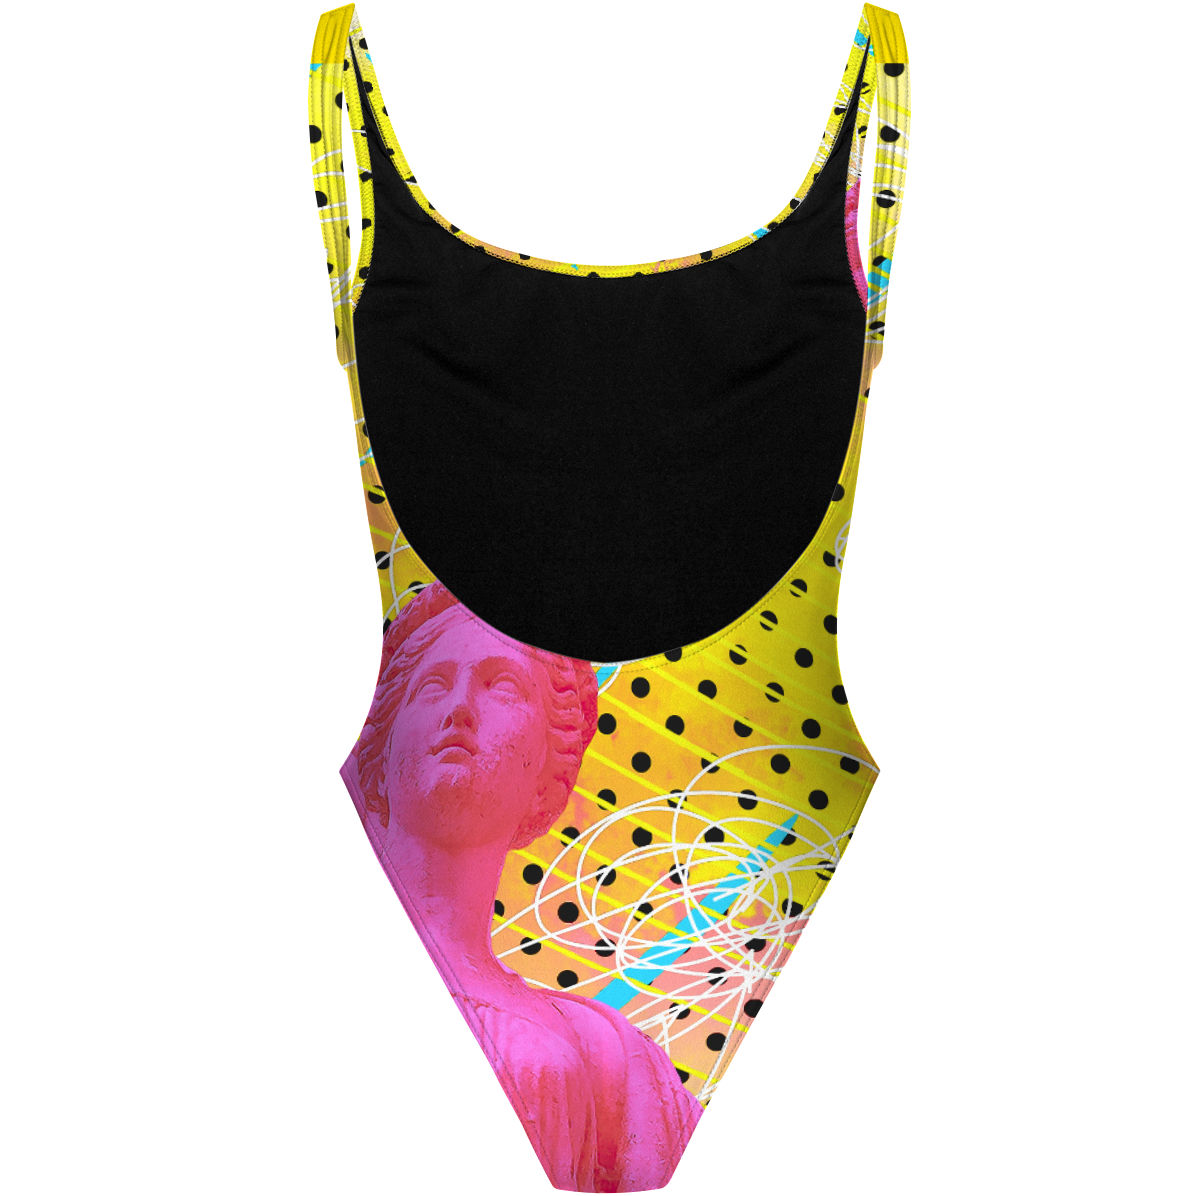 Trend Setter - High Hip One Piece Swimsuit